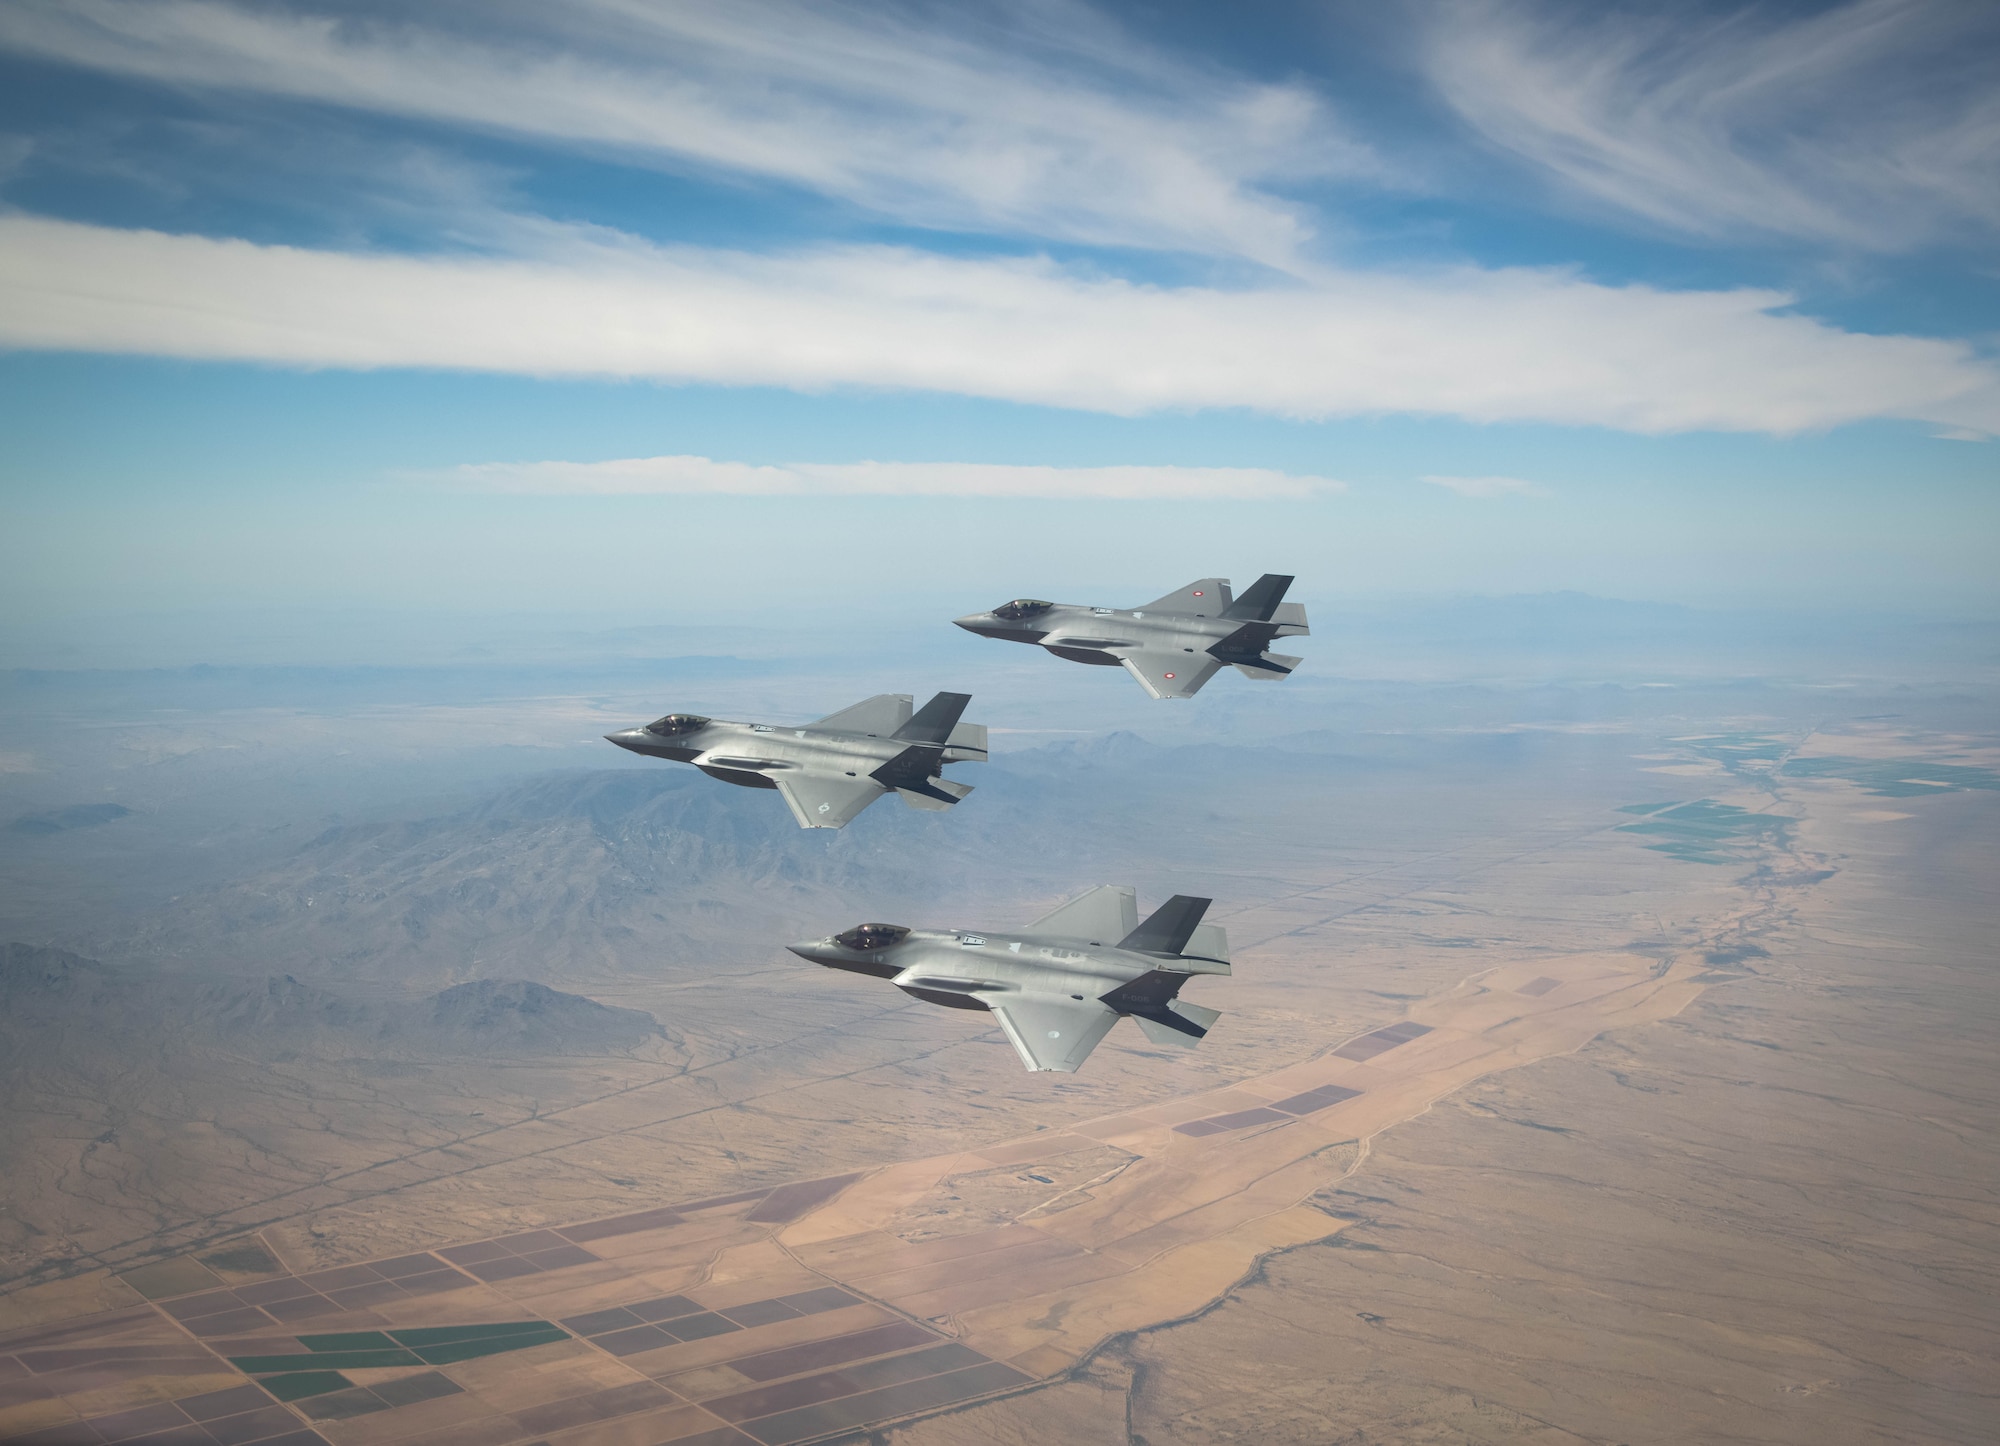 A U.S. Air Force, a Royal Danish Air Force and a Royal Netherlands Air Force F-35A Lightning II fighter jet assigned to the 308th Fighter Squadron, Luke Air Force Base, Arizona, fly in formation May 5, 2021, over Bagdad, Arizona.